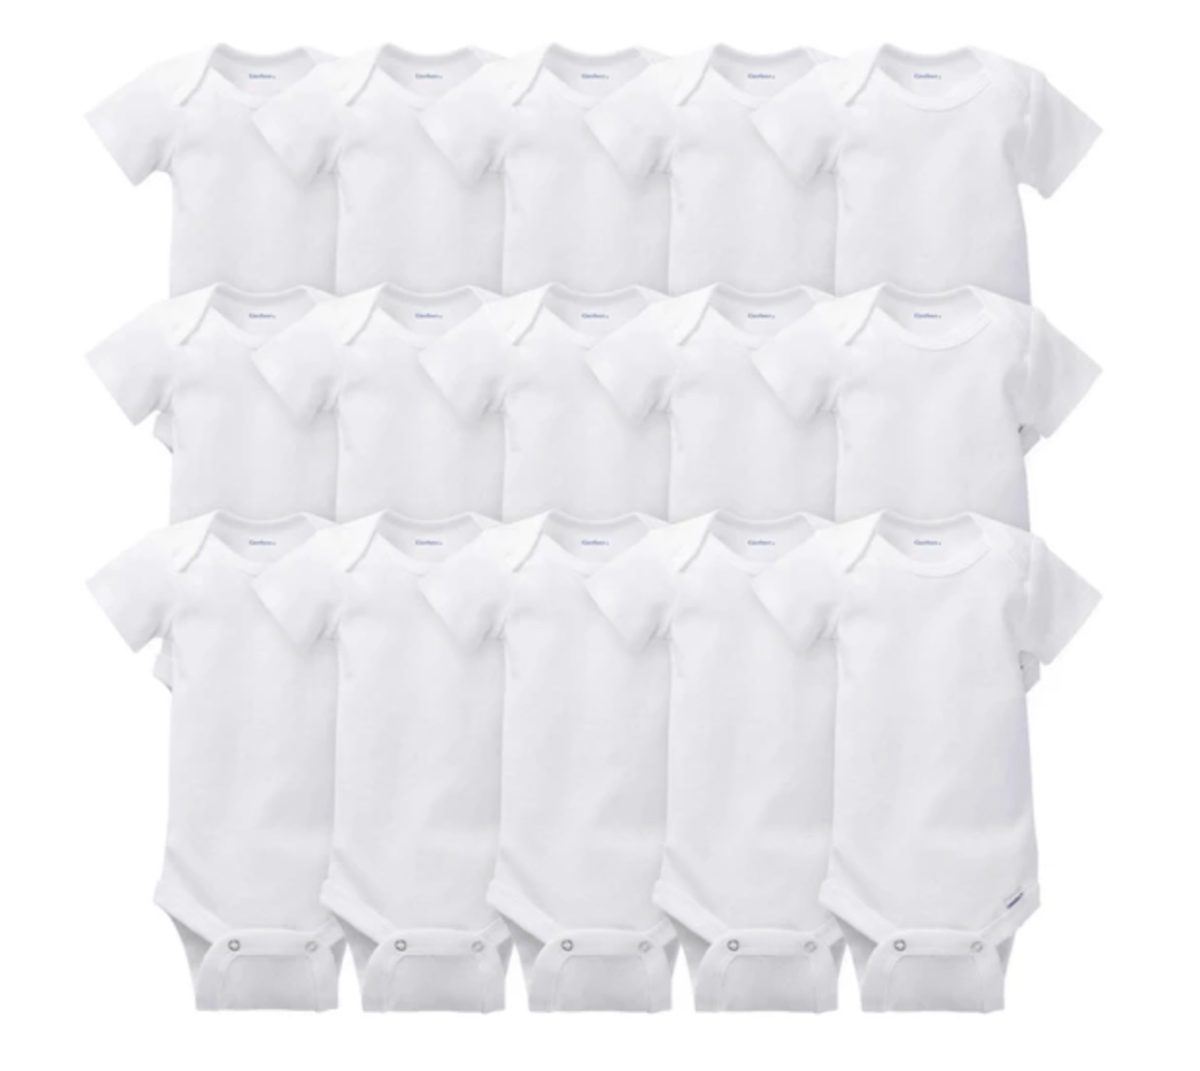 Check Out These Top-Selling Items From Gerber's Childrenswear Line | Here are some of their top-selling pieces for you to buy for your own little one or if you have a baby shower coming up, these items will make great gifts!